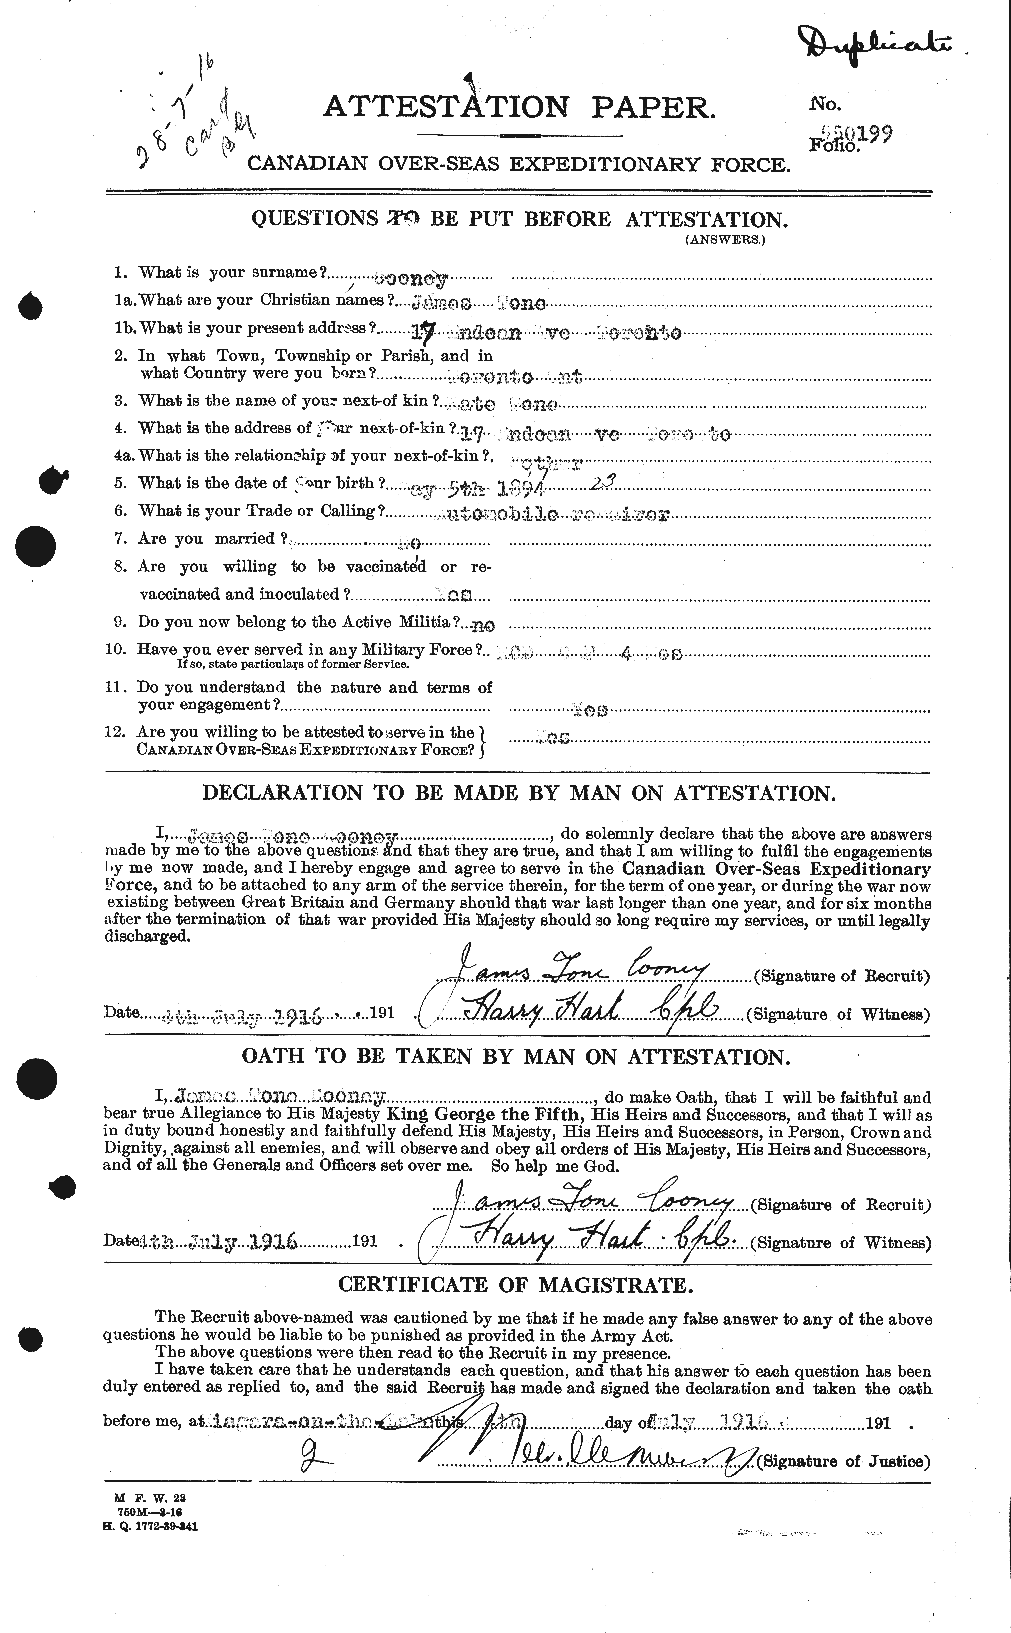 Personnel Records of the First World War - CEF 055209a